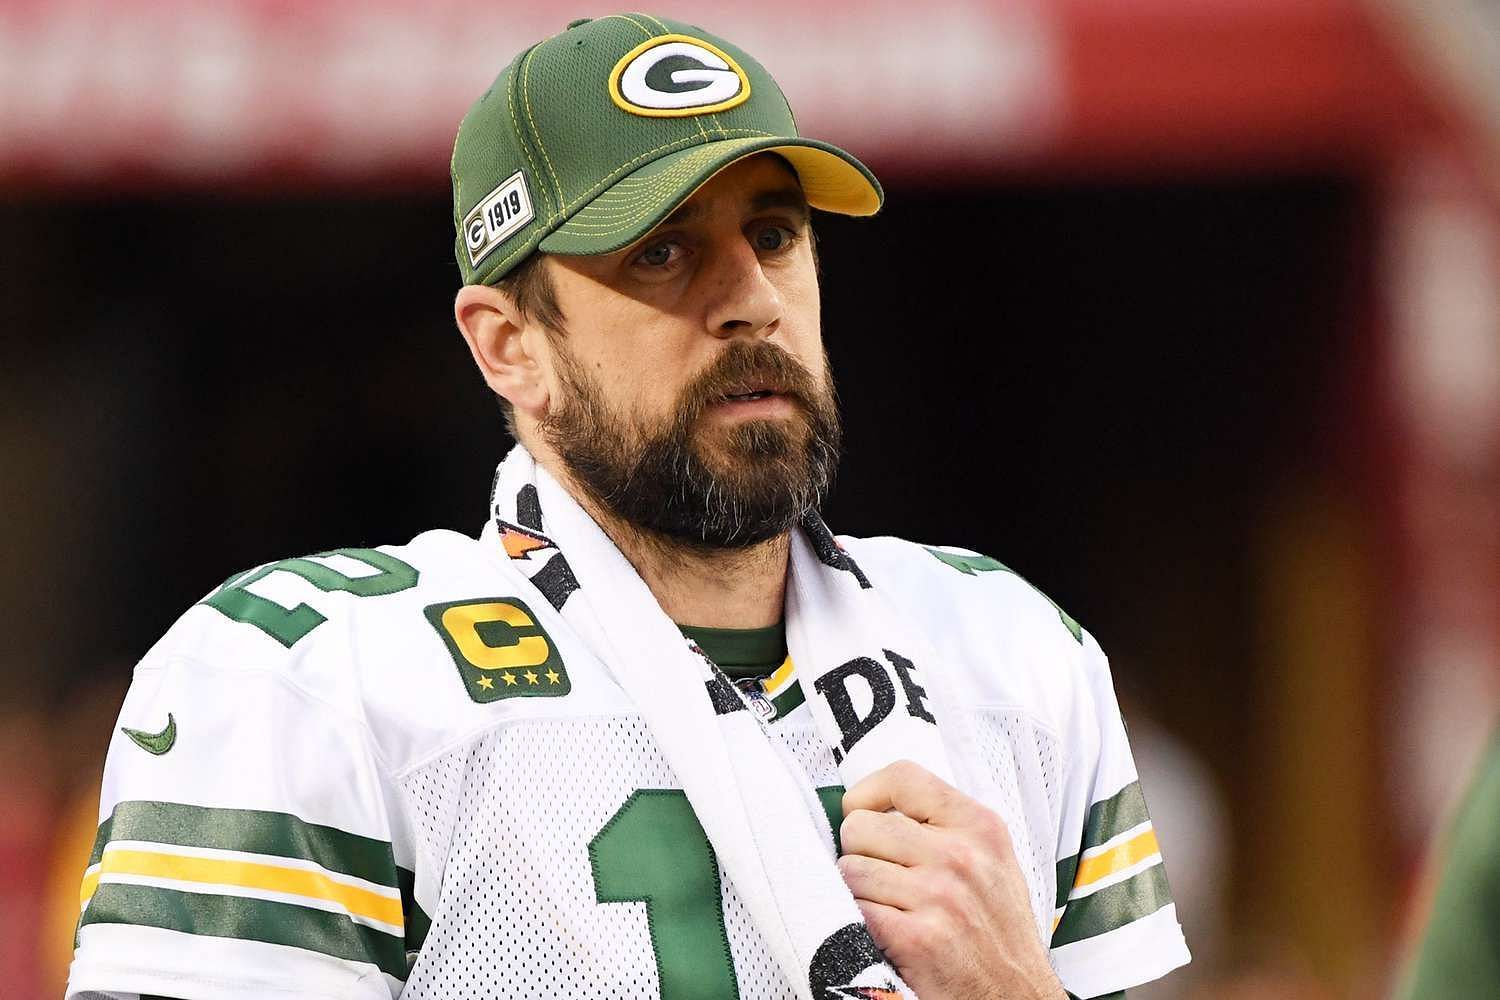 Aaron Rodgers Rumors: Jets Legend Says Team Can Unretire His